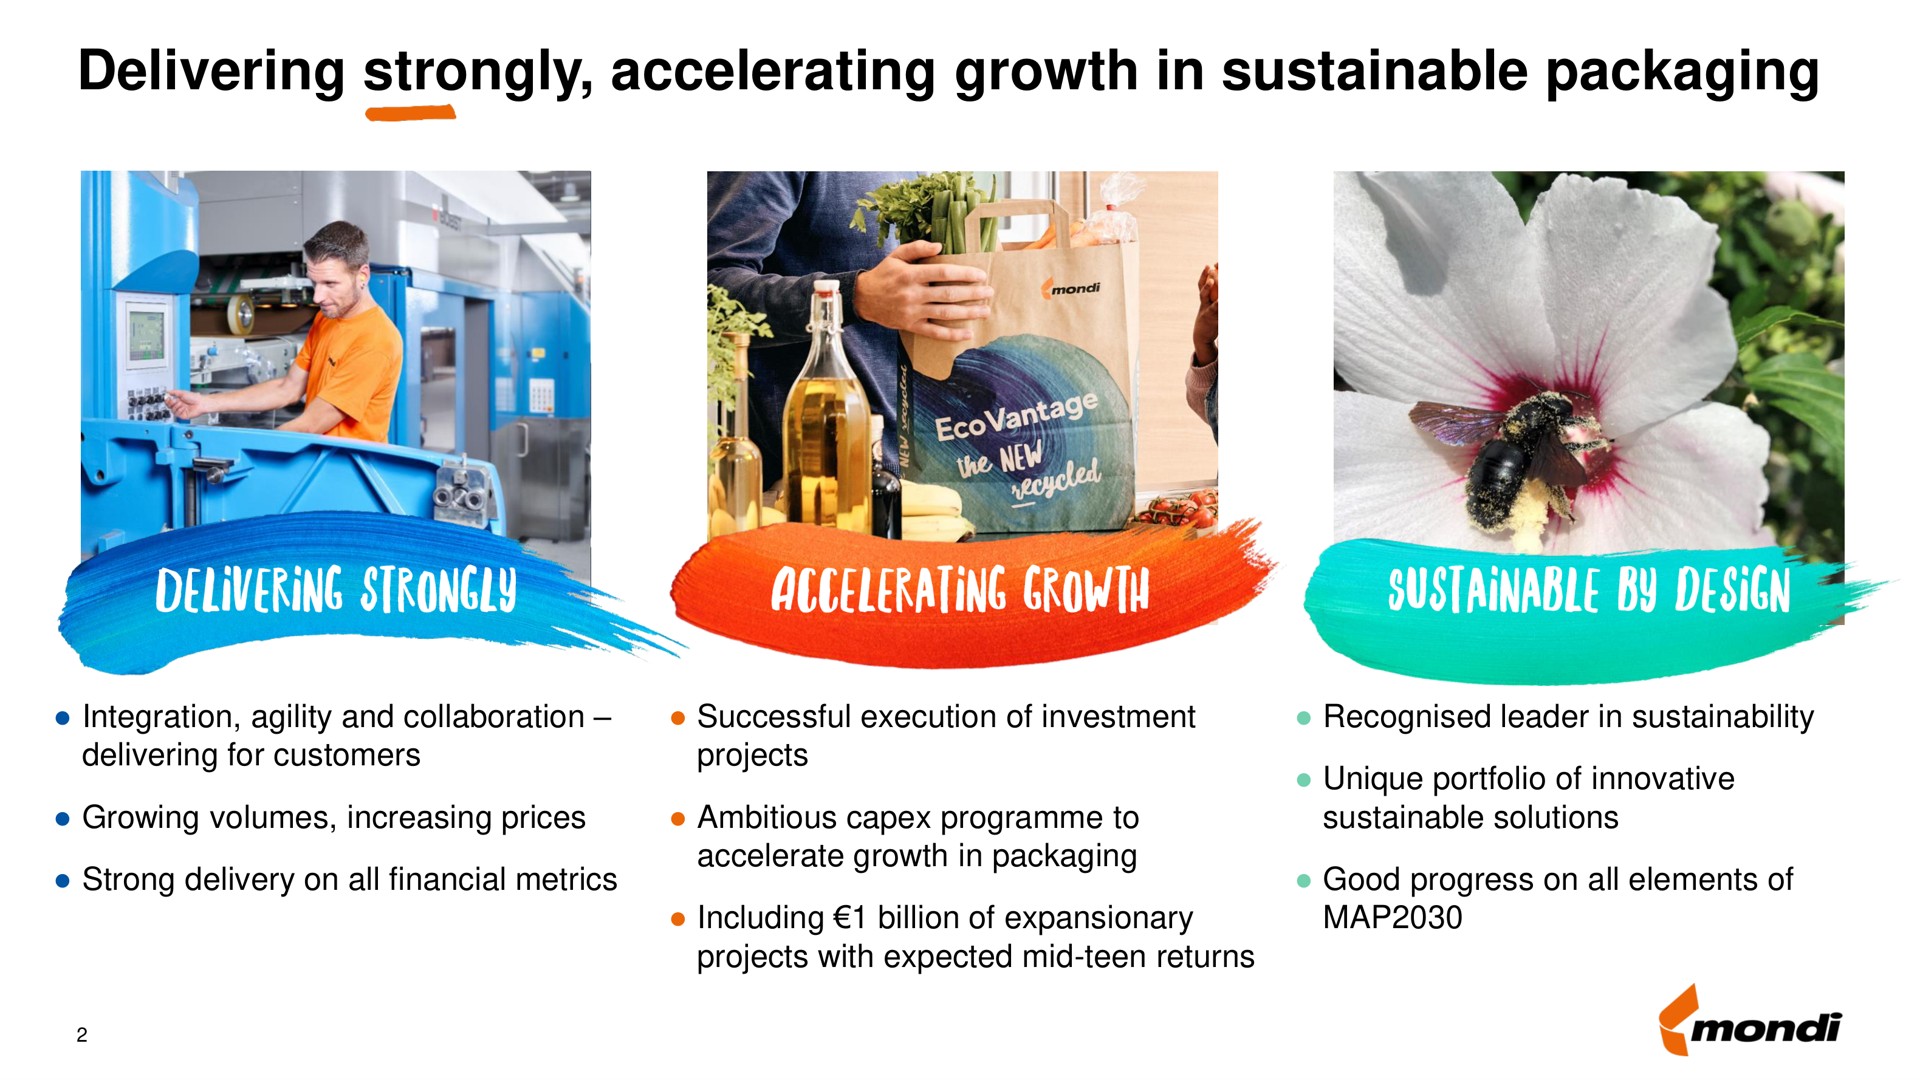 delivering strongly accelerating growth in sustainable packaging grow am by design | Mondi